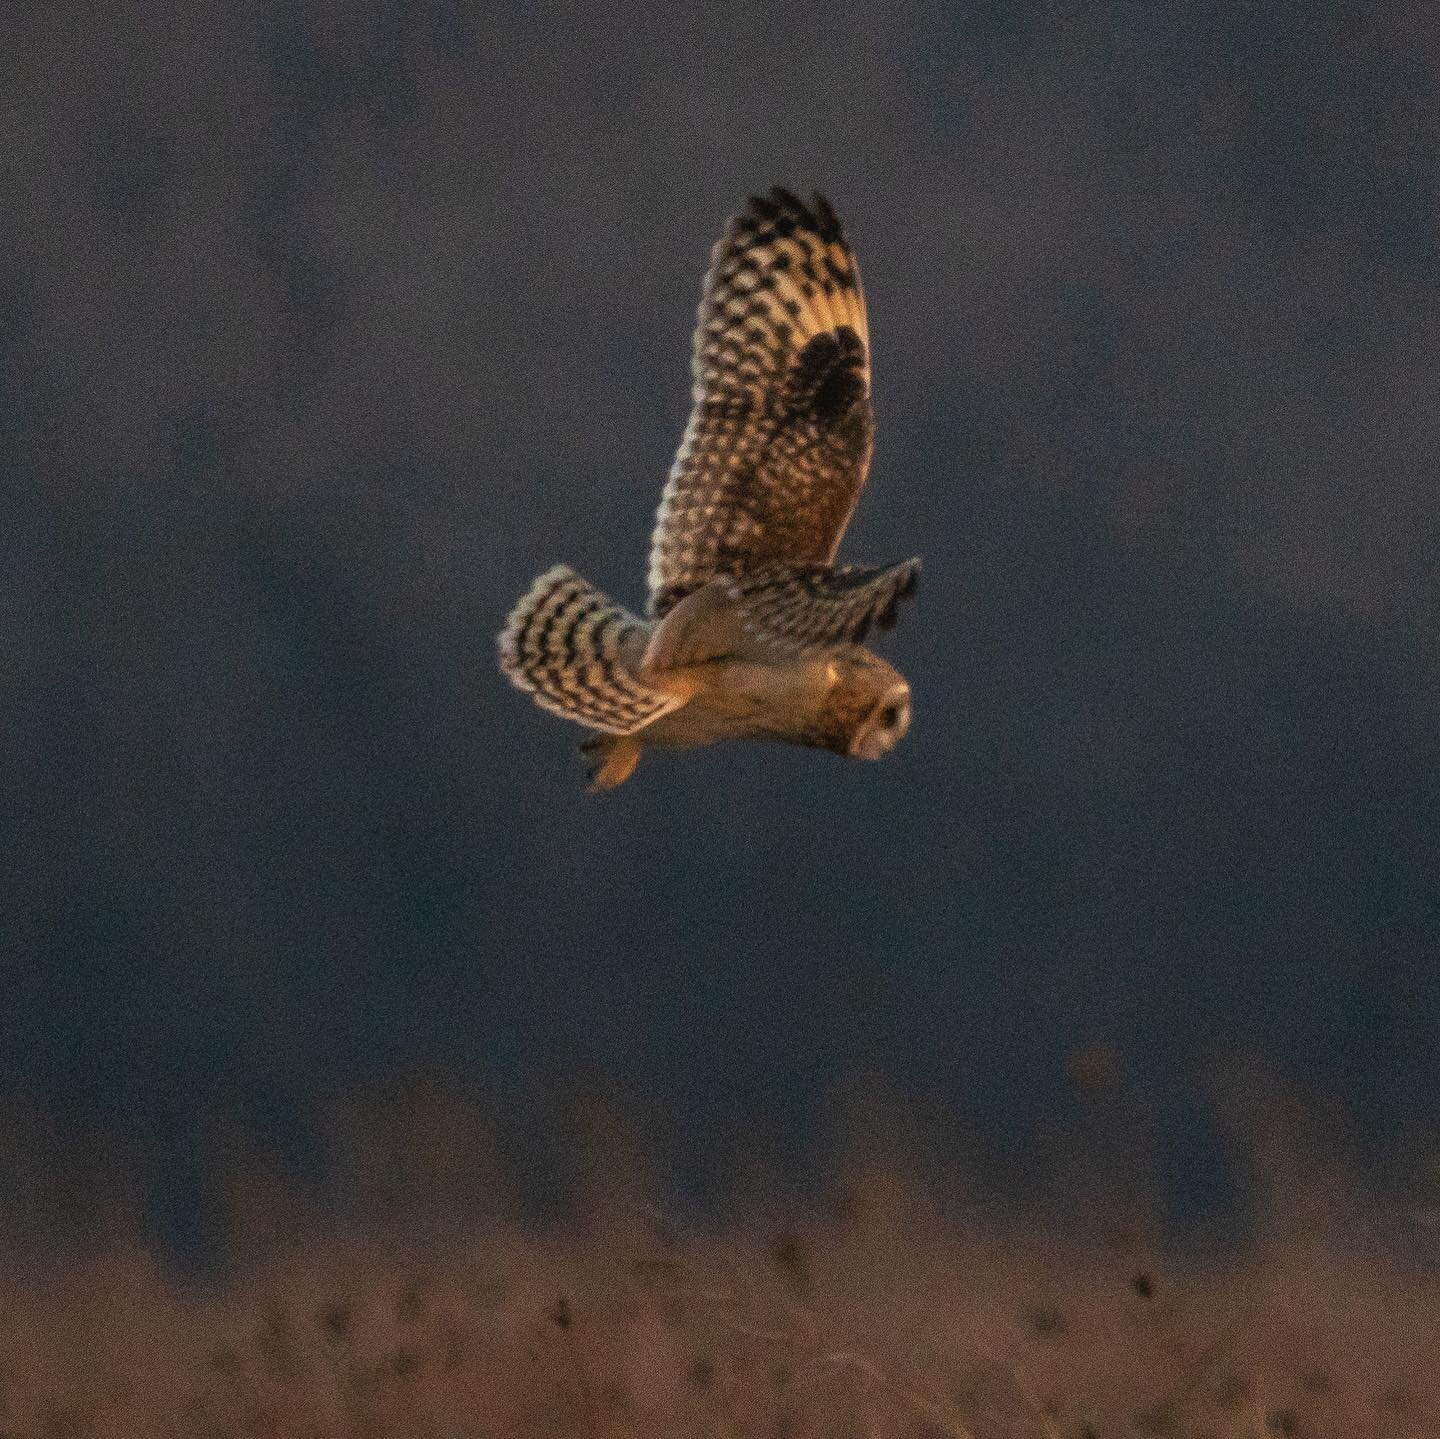 Mediocre shots of Superb Owls.
🦉
Attempting to catch short-eared owls at sunset as they hunted over Midewin International Tallgrass Prairie last December. 
🦉
Happy #SuperbOwlSunday